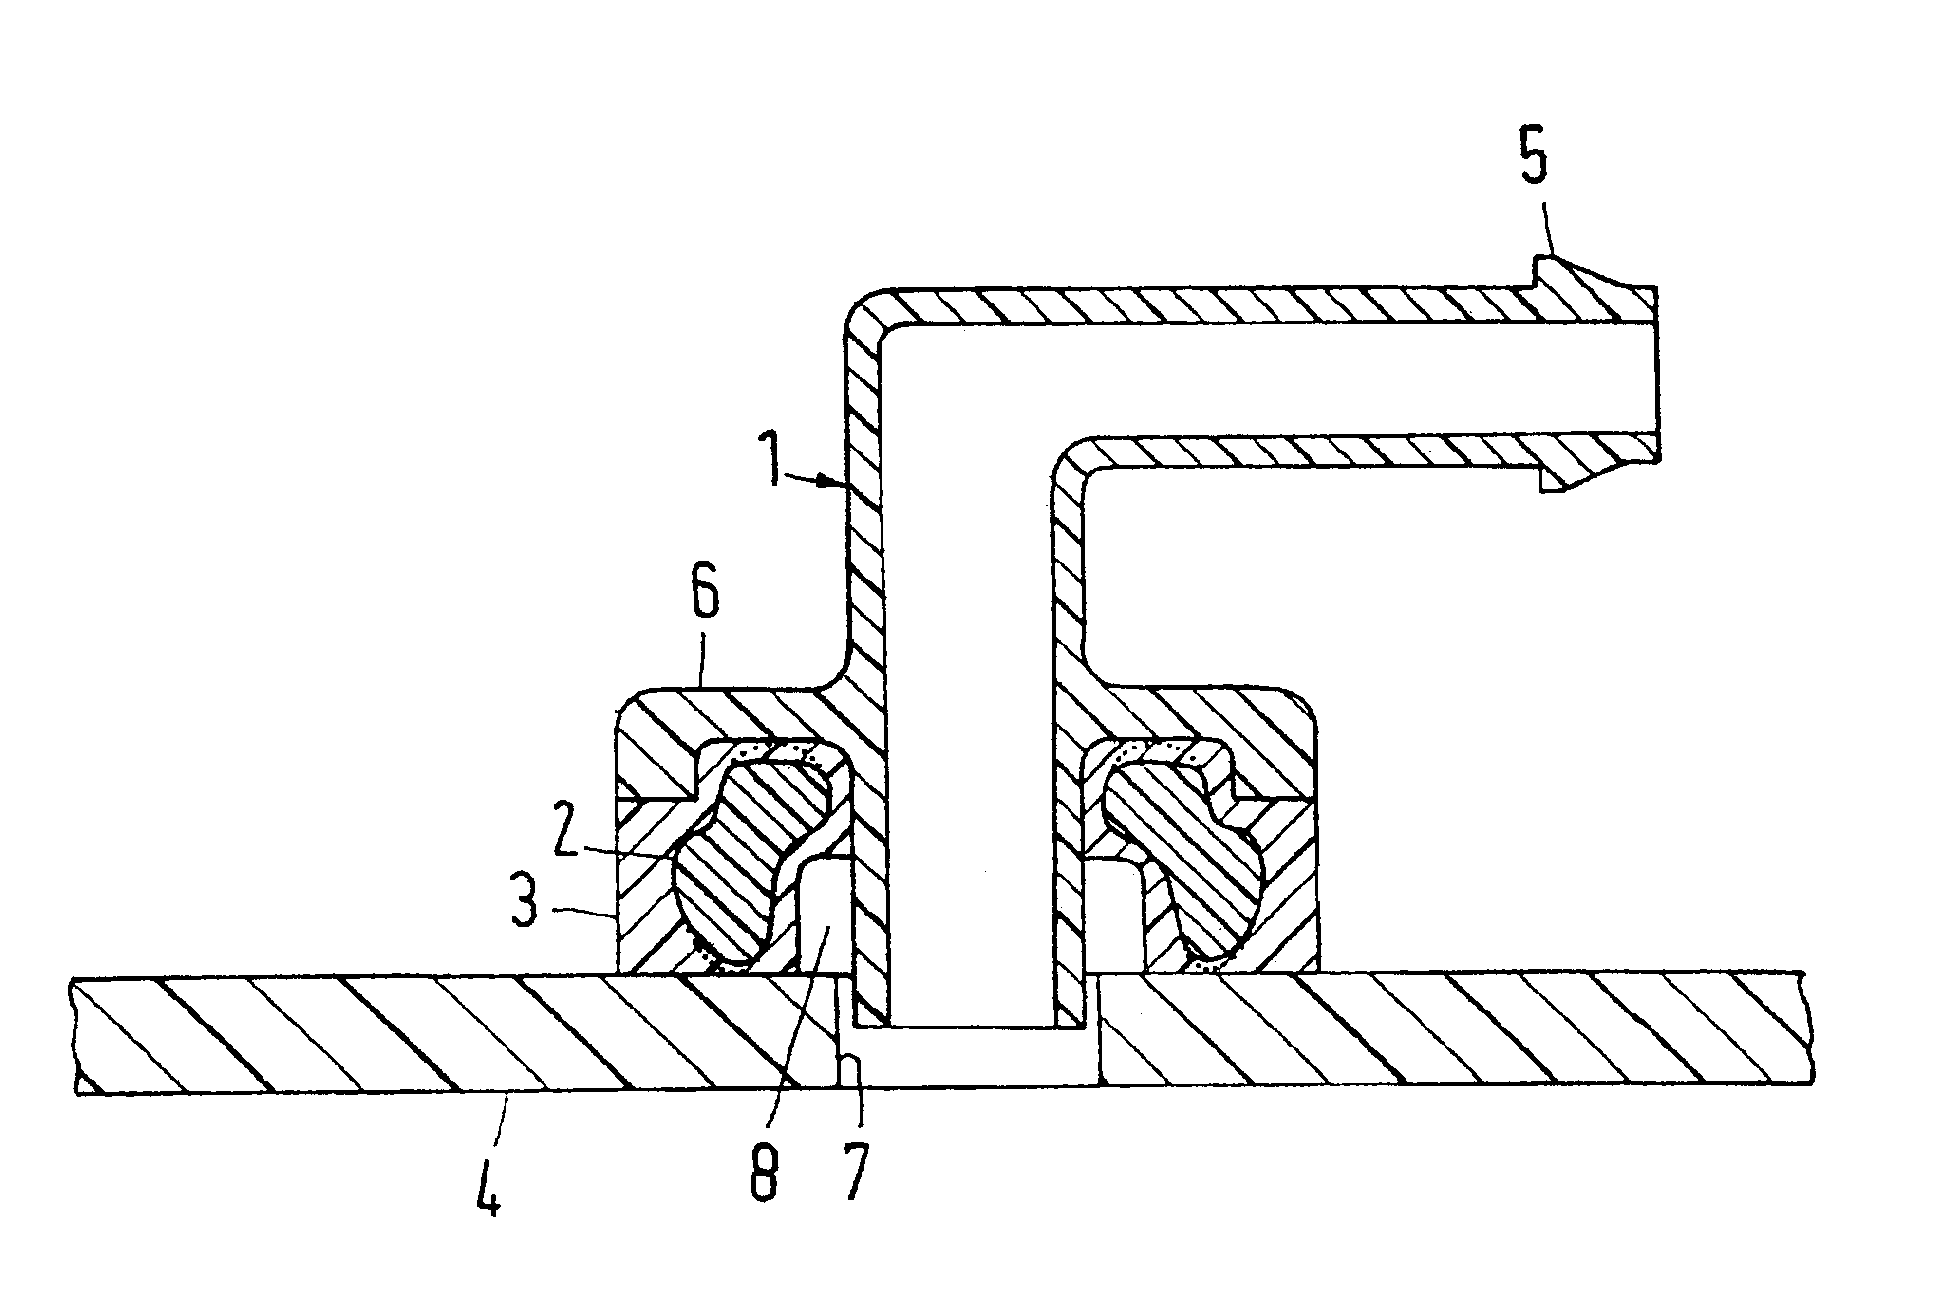 Coupling member for connecting a fuel receiving or fuel dispensing part to a fluid line and method for its manufacture